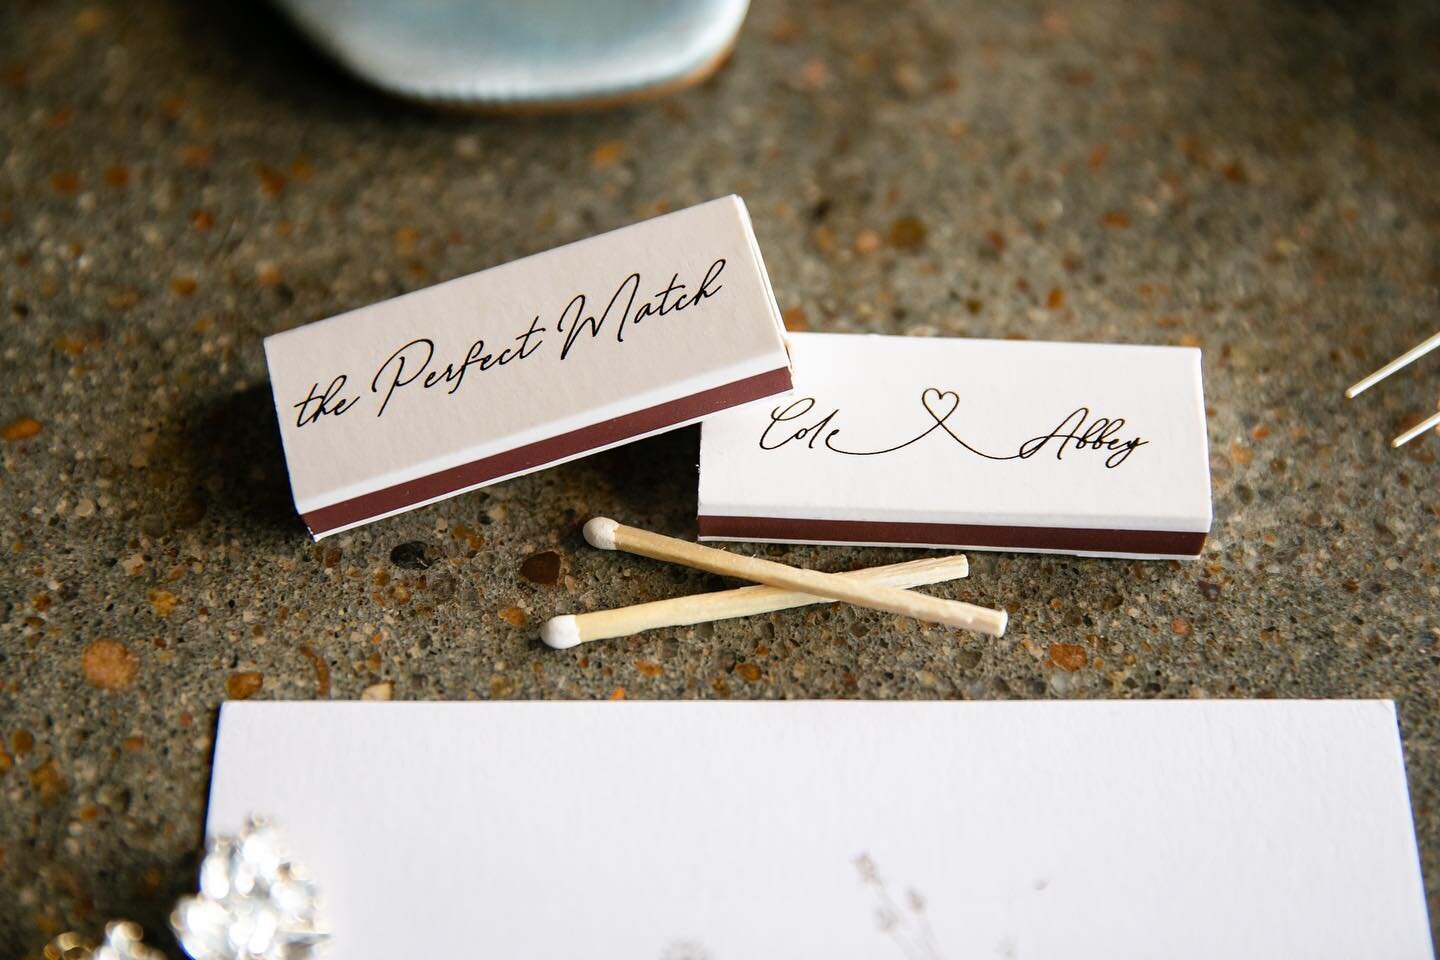 We make sure every item has been fully thought through from the ground up tented backyard weddings to the tiny match boxes! 
.
.
.
#kcwedding #newlyweds #loveourclients #celebrationsoflove #celebrationsoflovekc #weddingplannerkc #itsallinthedetails #